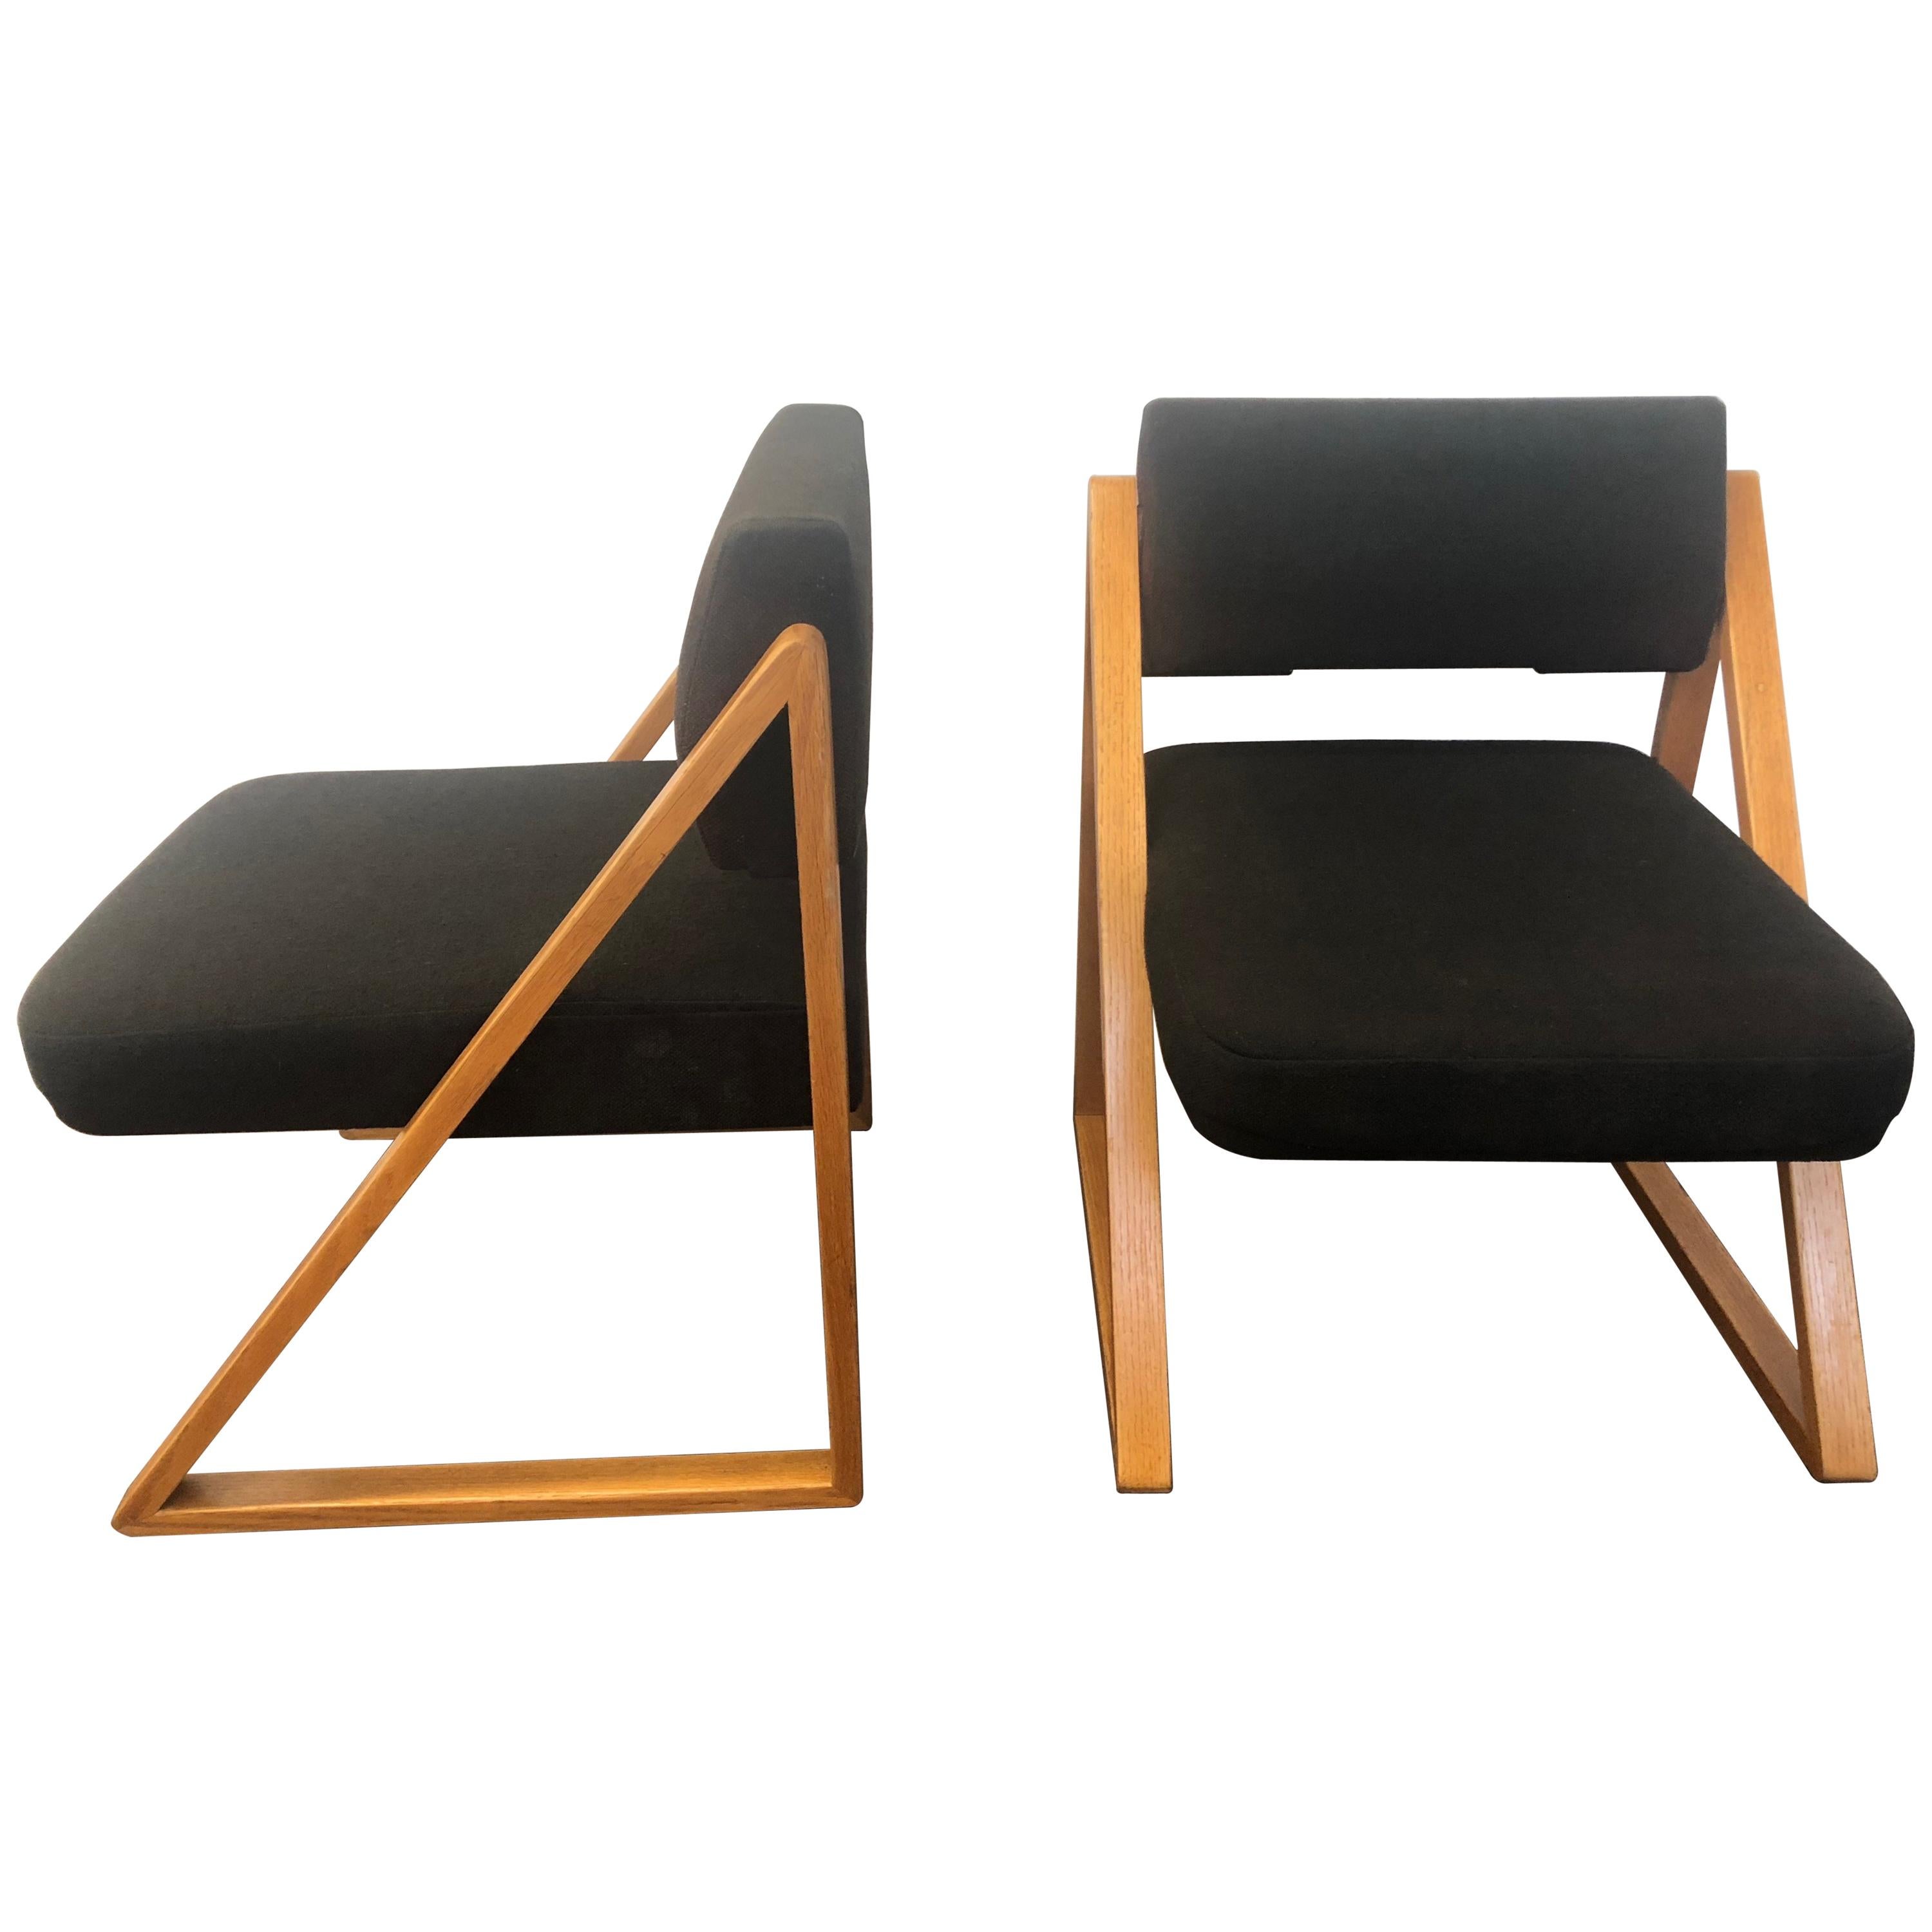 Pair of Solid Oak Lounge Chairs, France, circa 1965